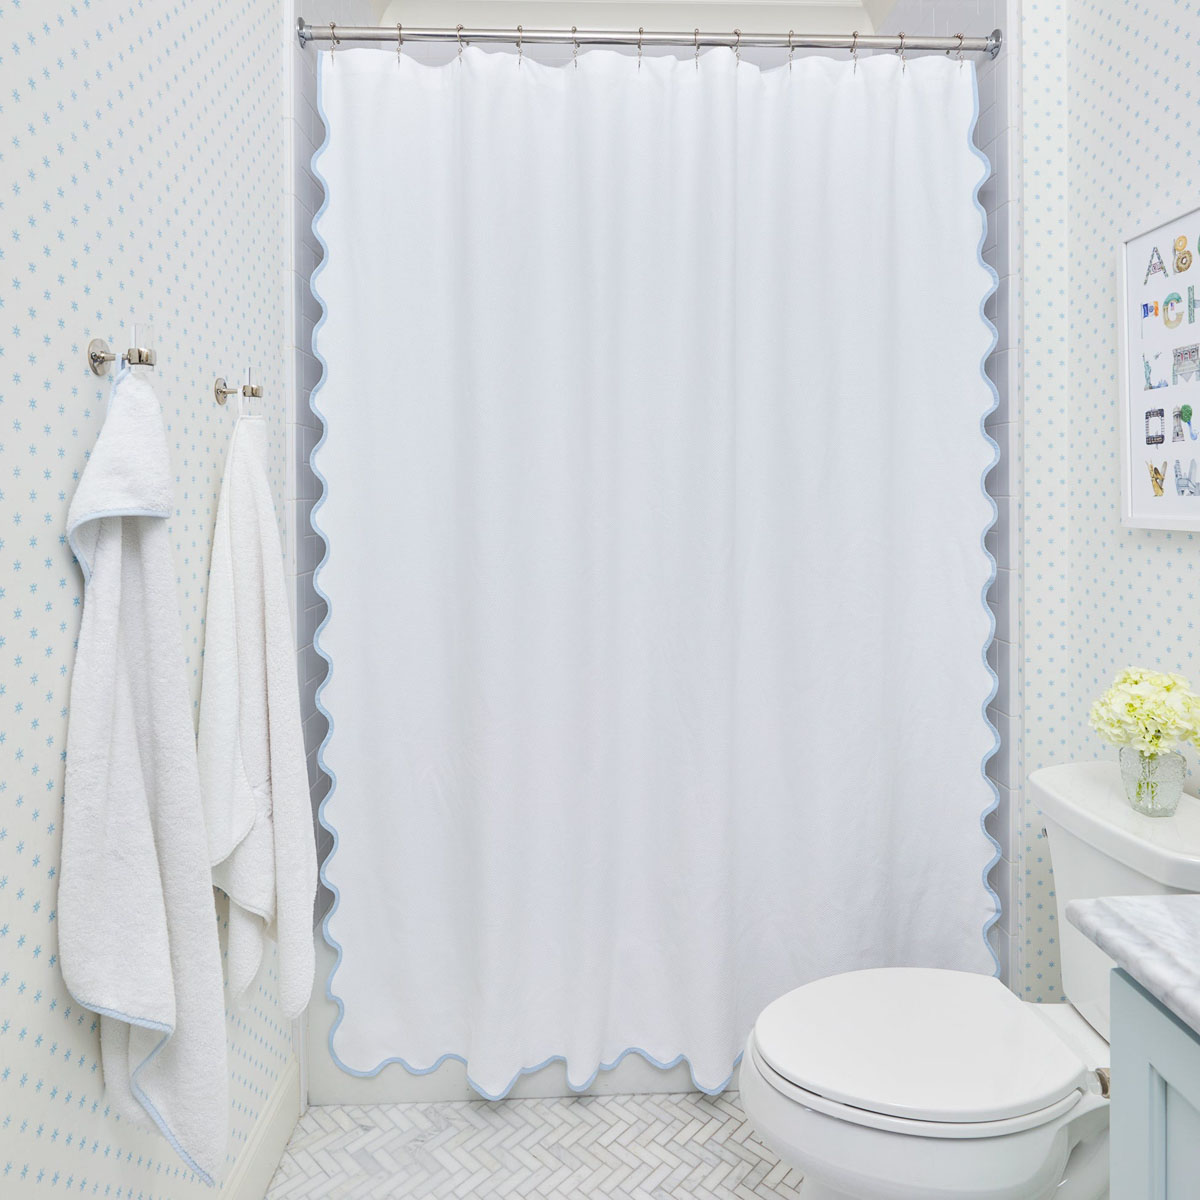 Extra long shower curtain with wavy edges